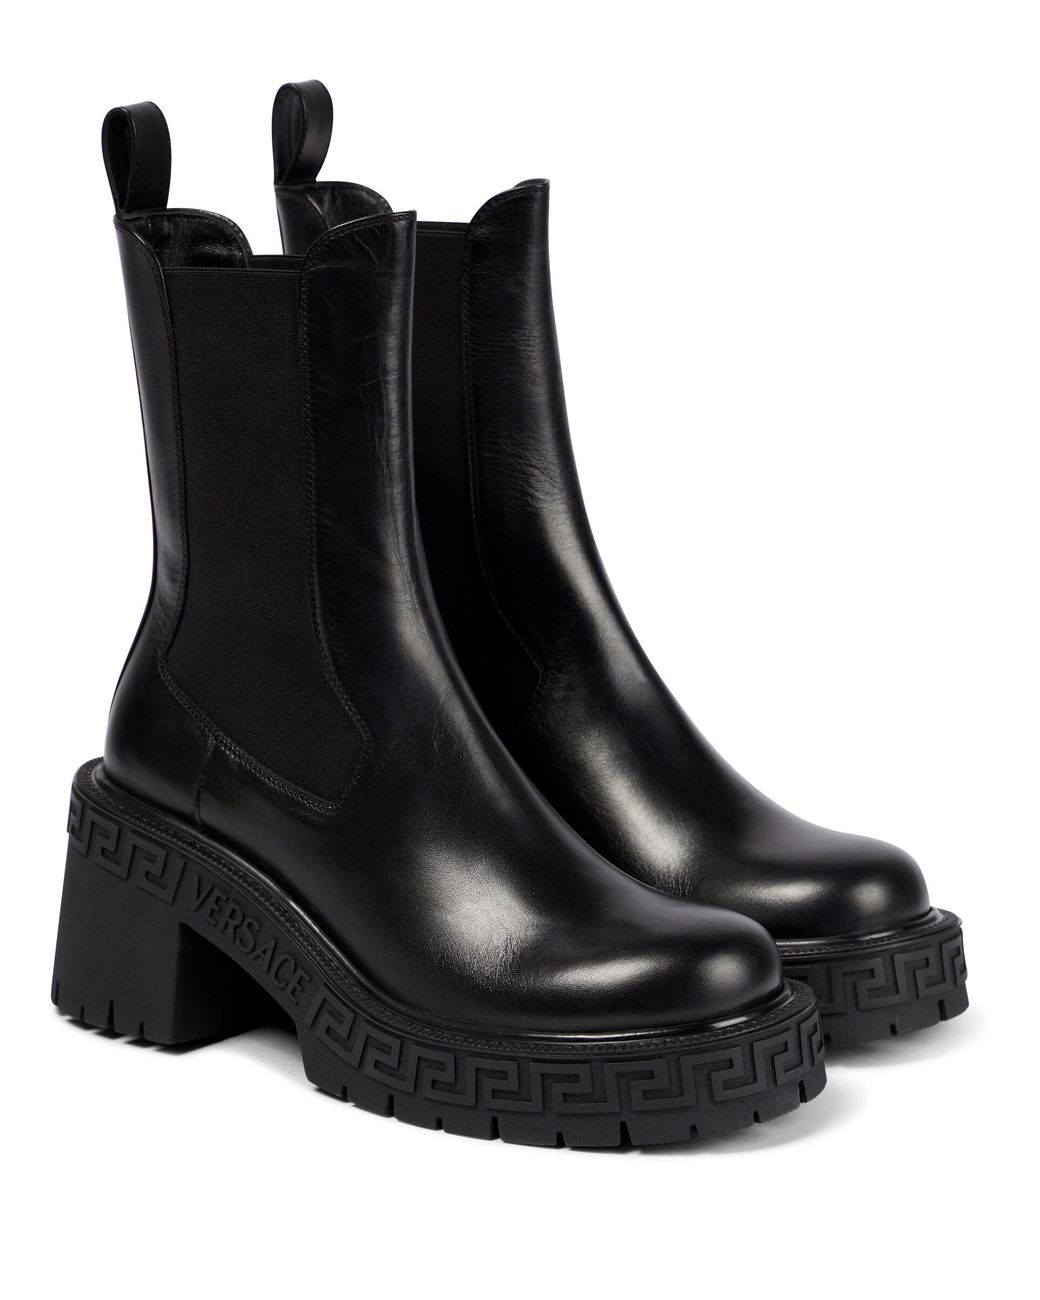 Versace Greca Leather Chelsea Boots in Black | Lyst